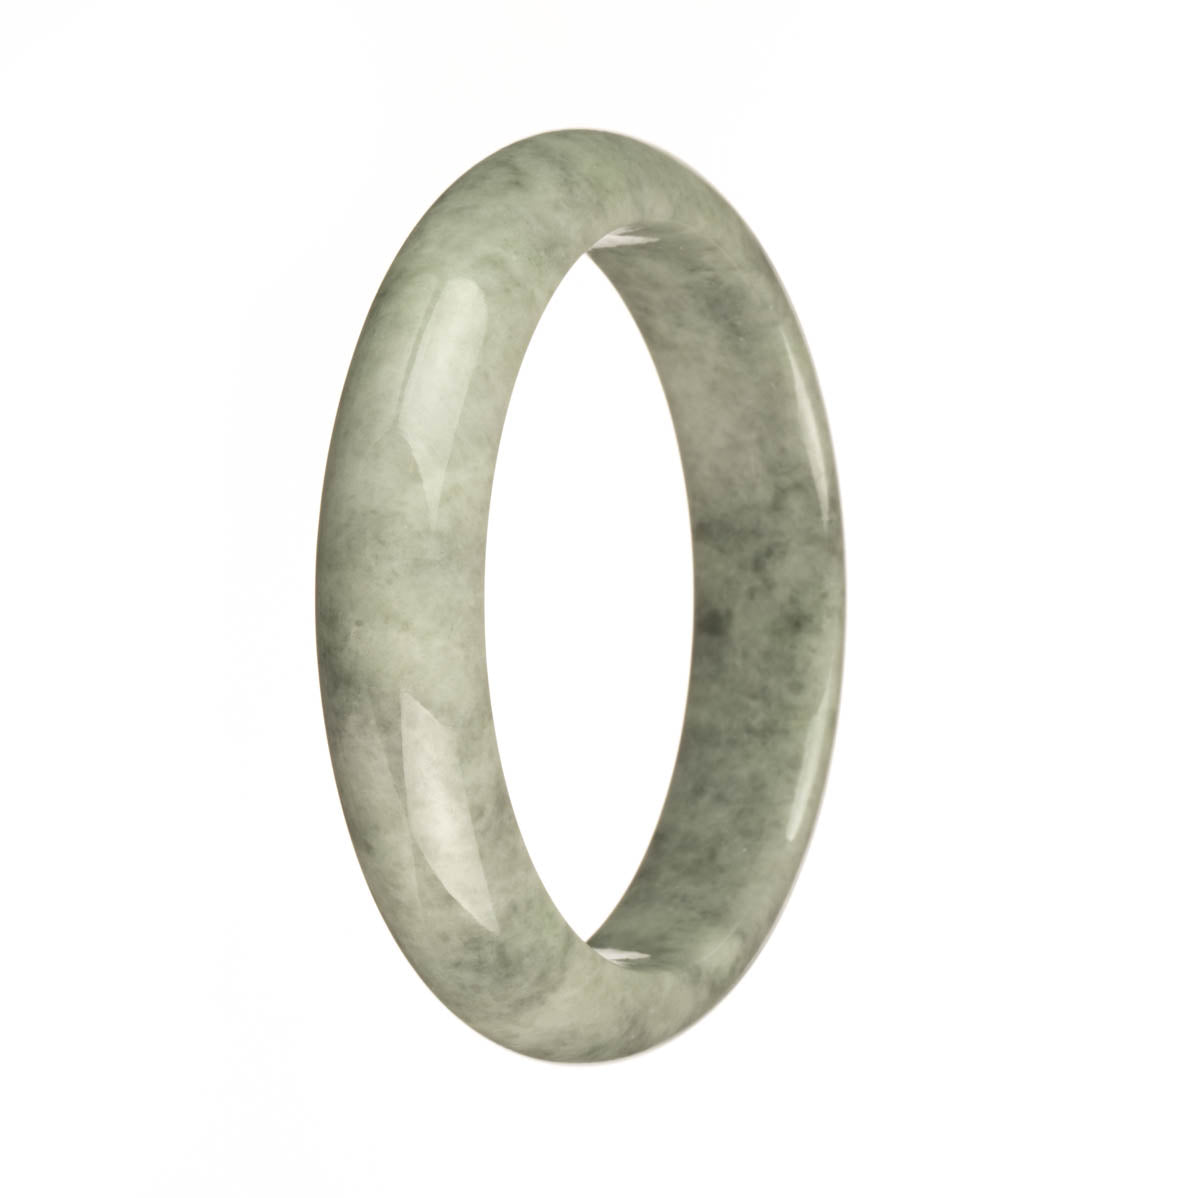 A close-up photo of a genuine natural grey pattern jadeite bracelet. The bracelet features a half-moon shape and measures 59mm in size. Created by MAYS™.